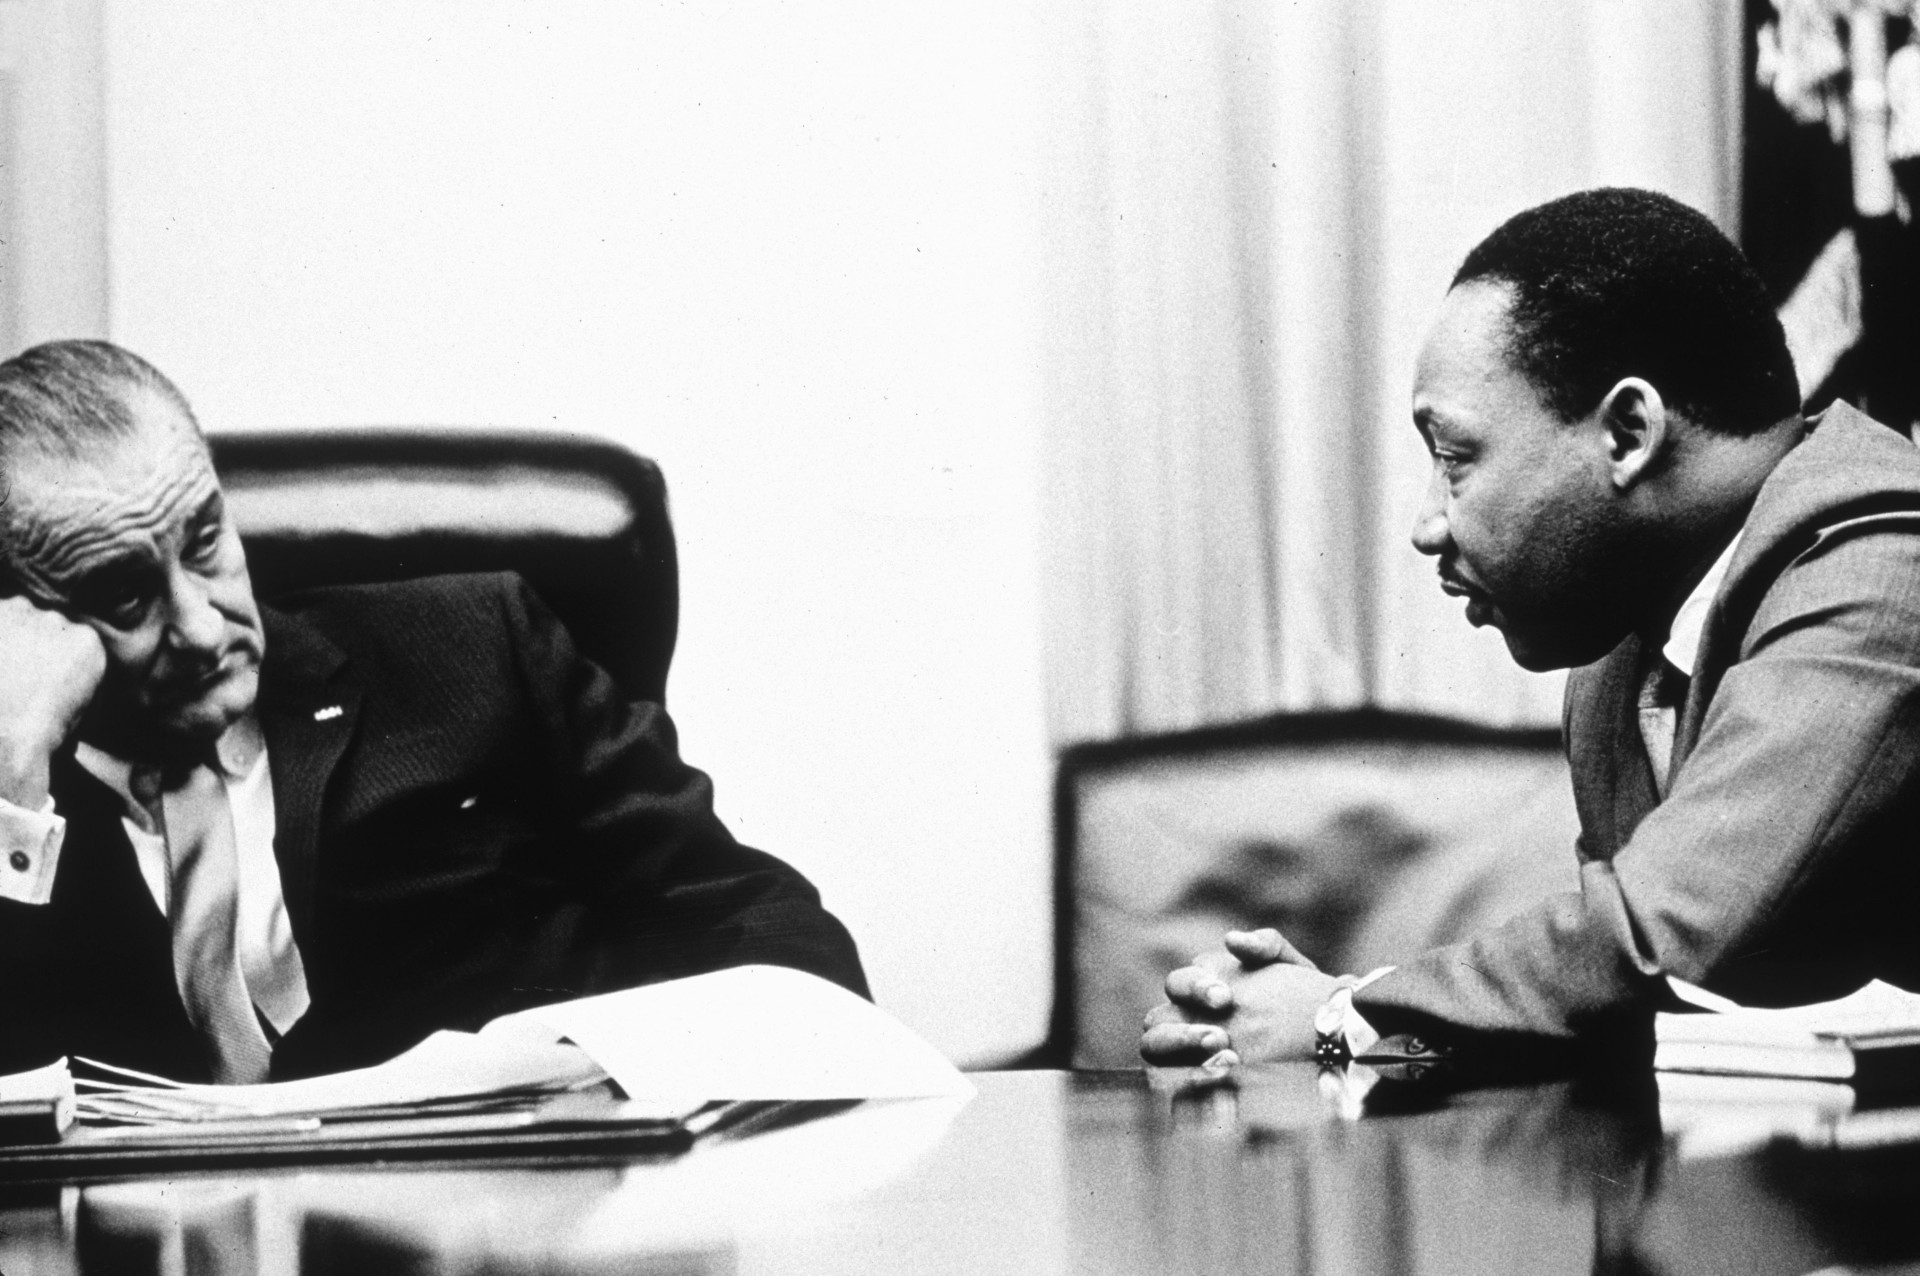 The civil rights leader made several visits to Washington to confer with LBJ.<p><a href="https://www.msn.com/en-us/community/channel/vid-7xx8mnucu55yw63we9va2gwr7uihbxwc68fxqp25x6tg4ftibpra?cvid=94631541bc0f4f89bfd59158d696ad7e">Follow us and access great exclusive content every day</a></p>